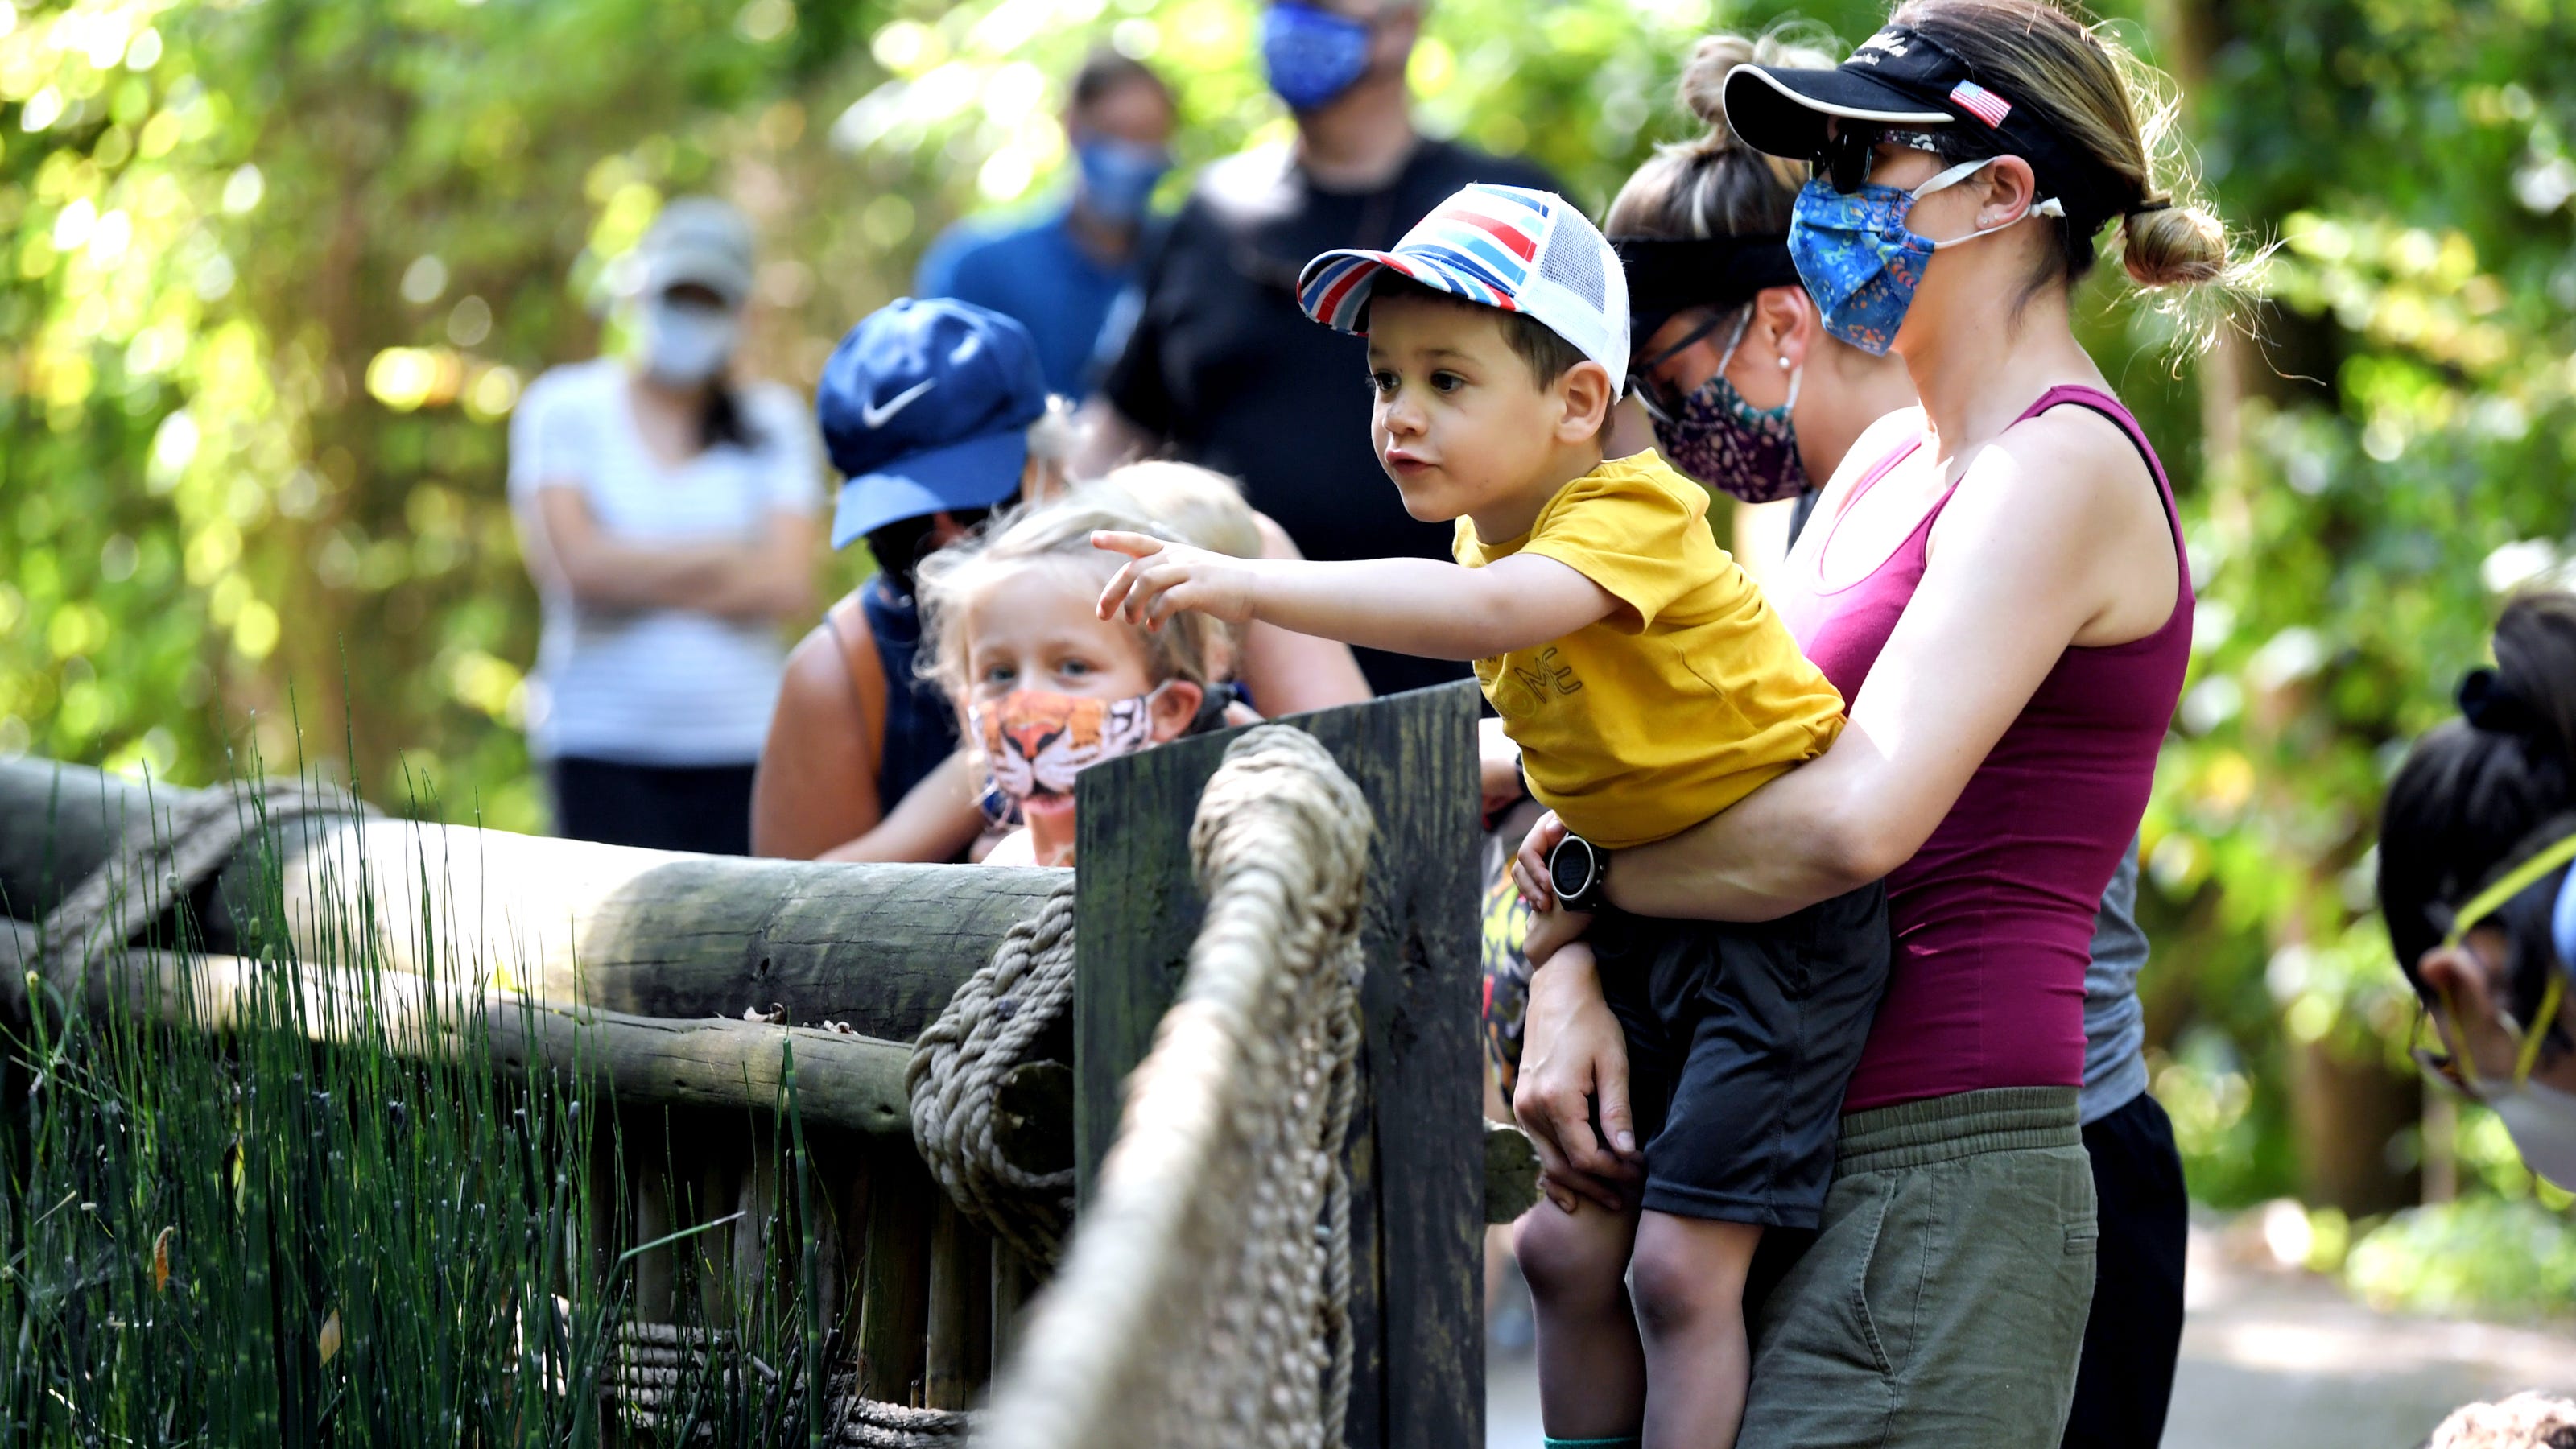 Things to do in Nashville: Zoo discounts plus dining, shopping deals